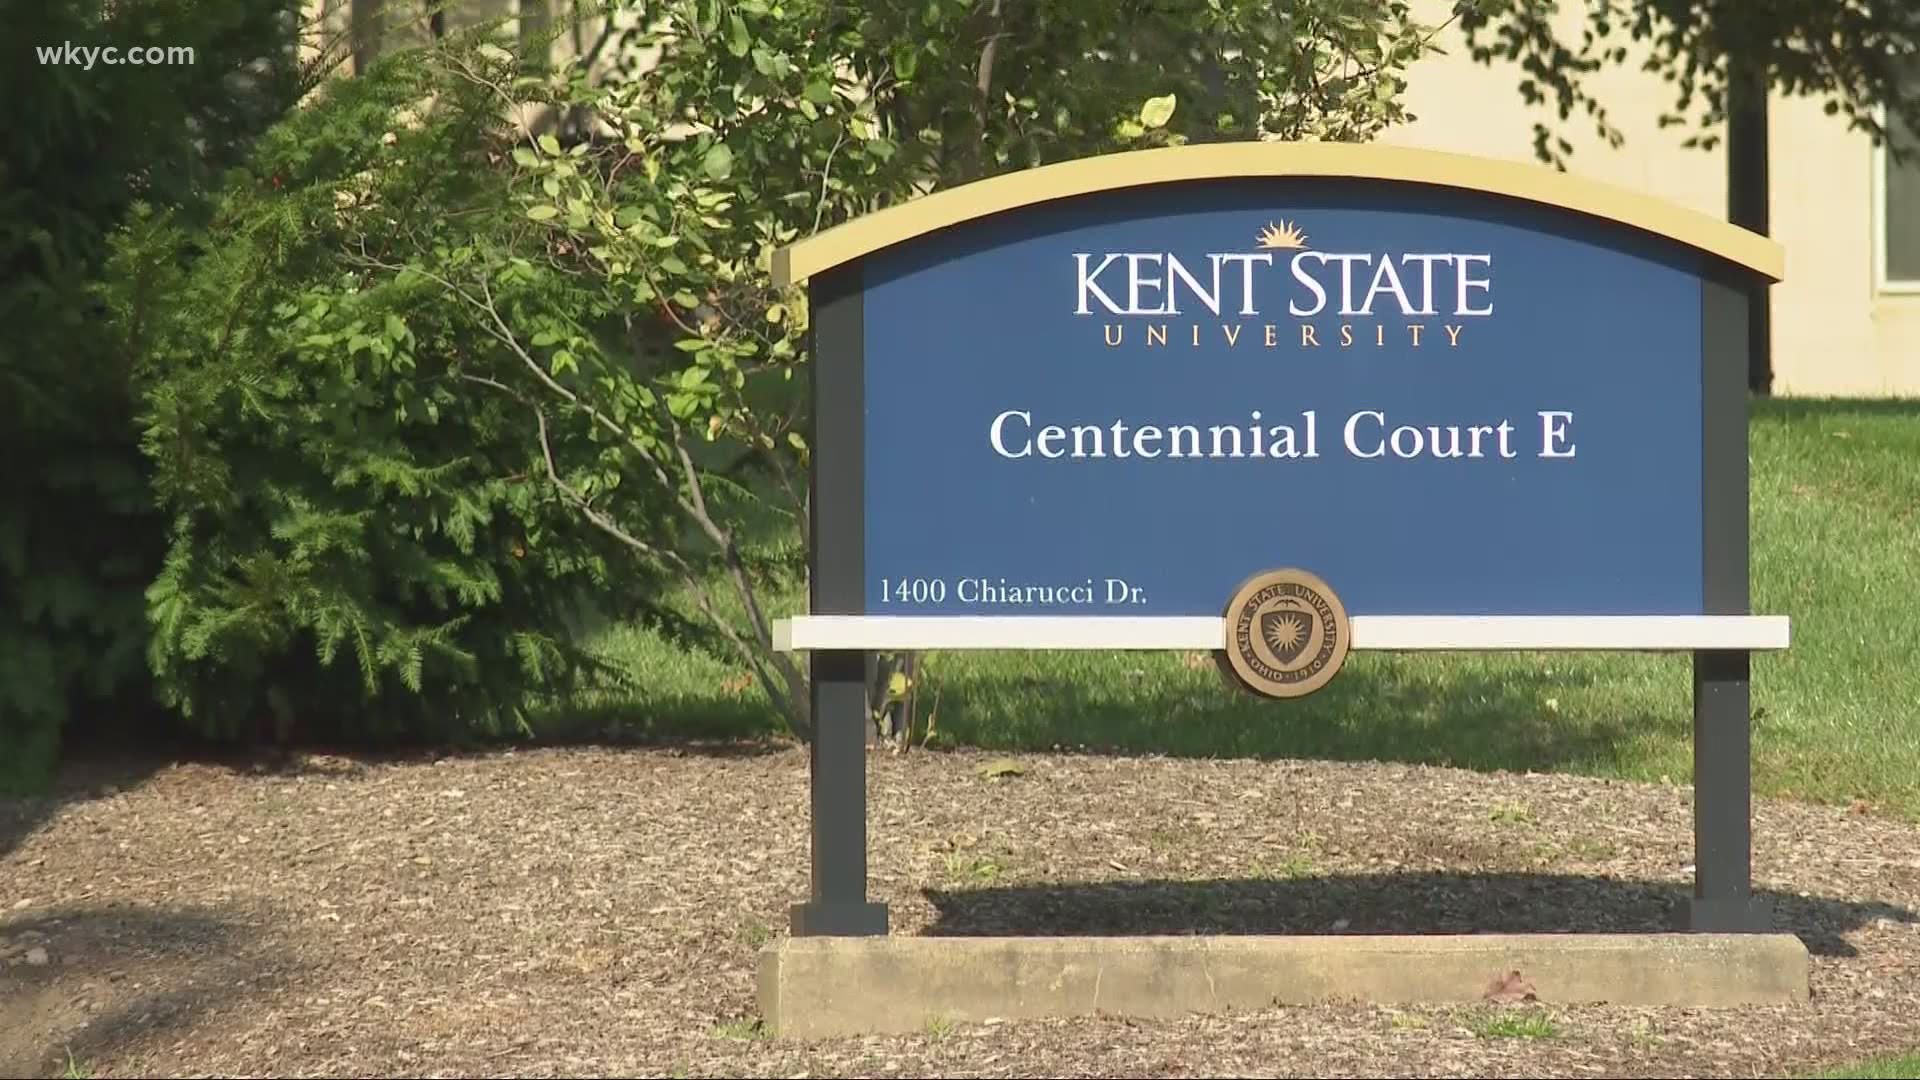 KSU now has dozens of students in quarantine, after more positive Covid-19 cases on campus. Tiffany Tarpley tells us, what else is being done to keep others safe.